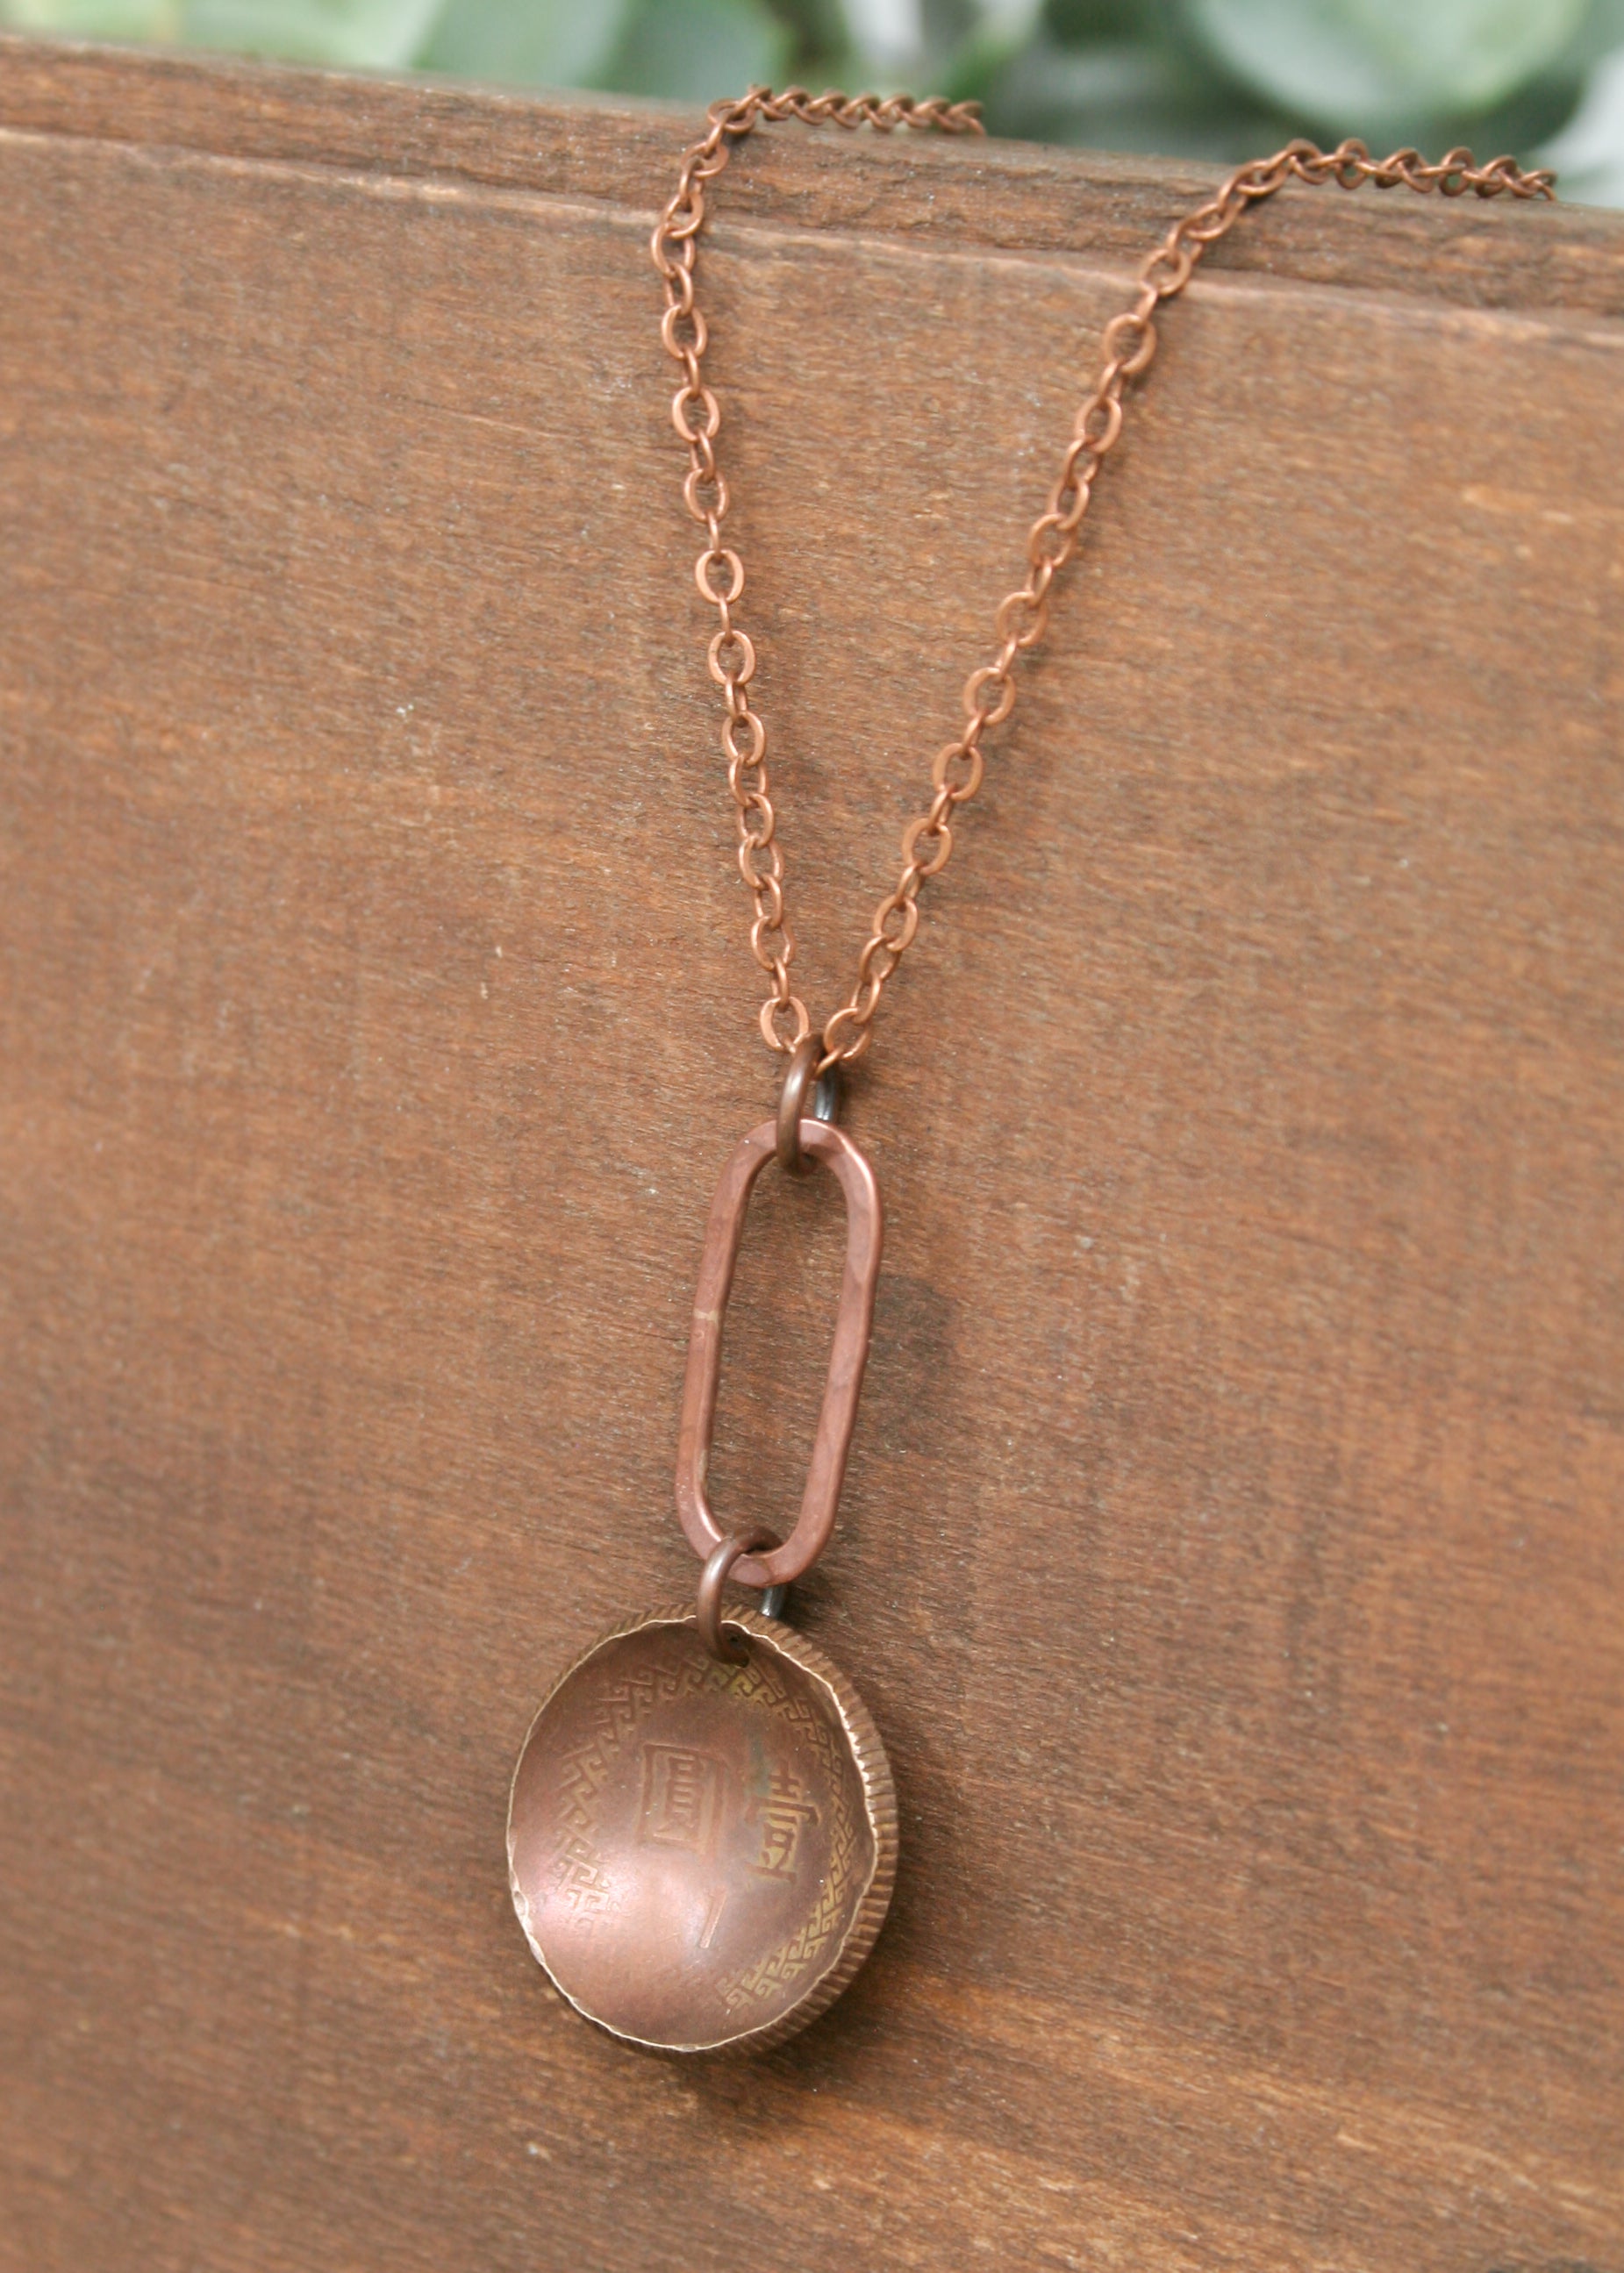 a close up of a necklace on a wooden surface